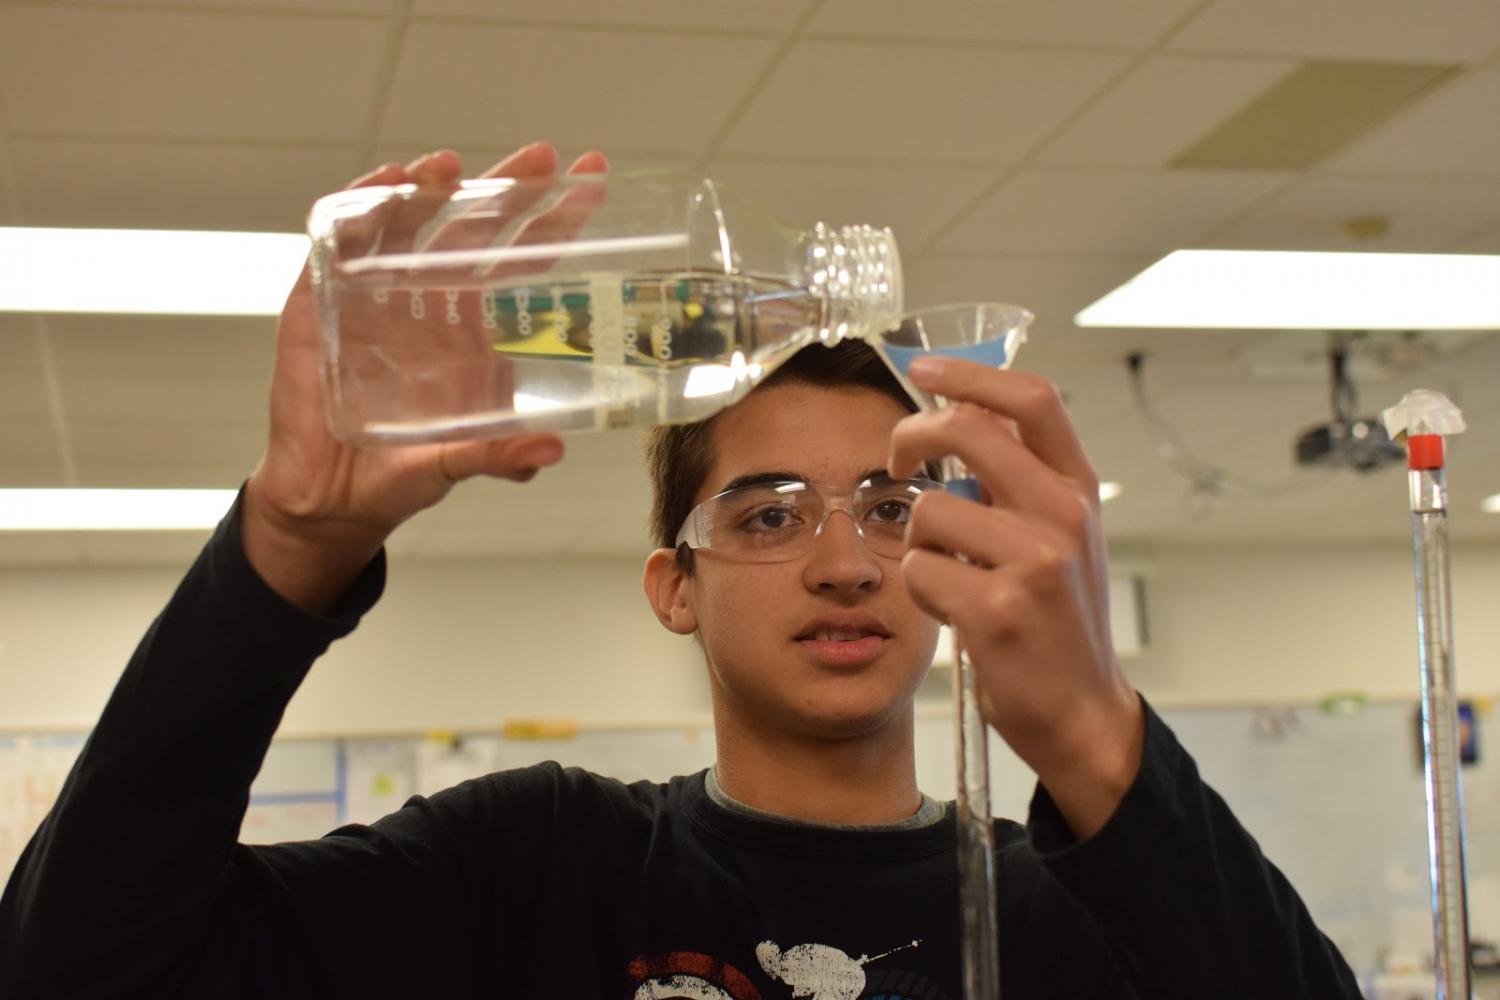 During+a+titration+lab+in+Chemistry+class%2C+Sophomore+Armaan+Munsiff+pours+sodium+hydroxide+into+a+burette.